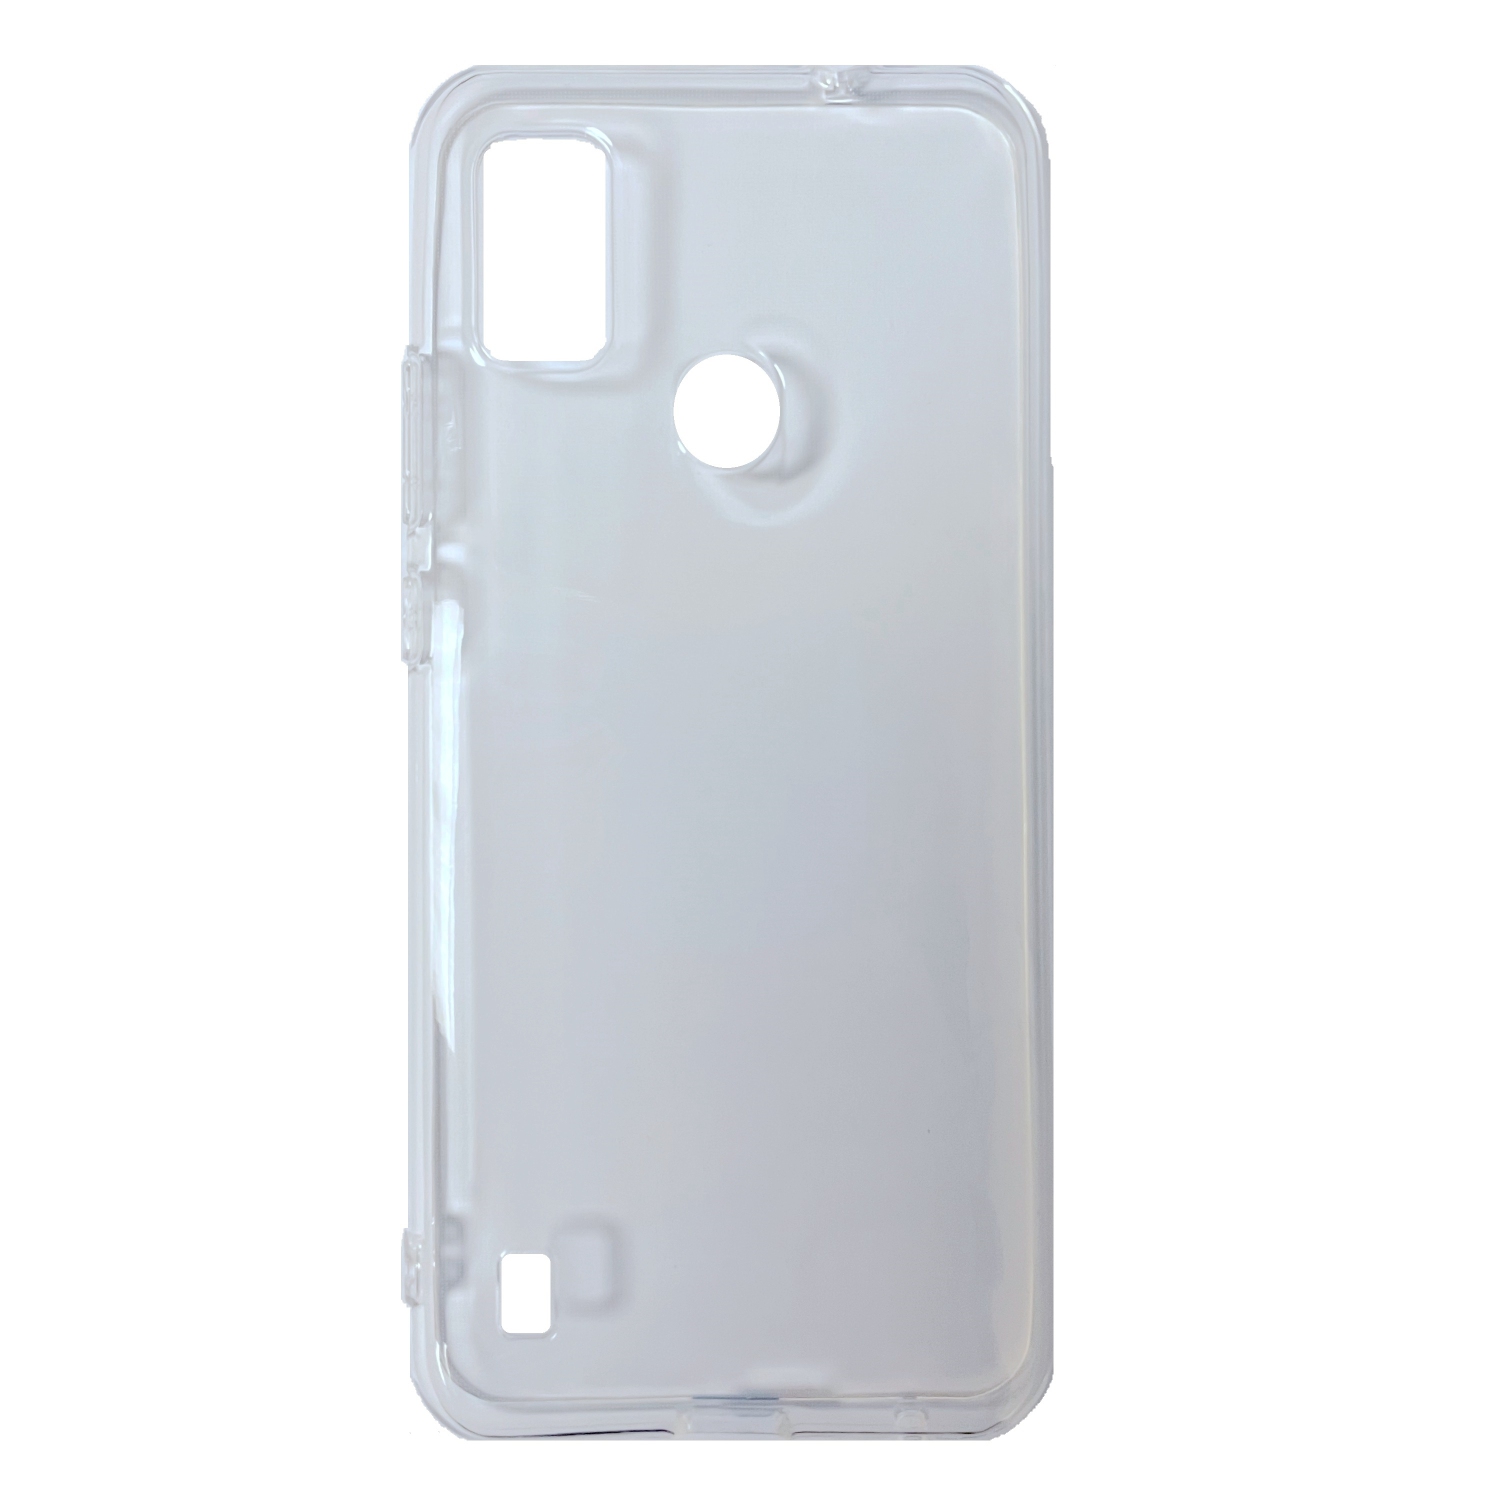 TopSave Transparent Glossy Surface Soft TPU Gel Rubber Case For ZTE Blade A7P 6.5"